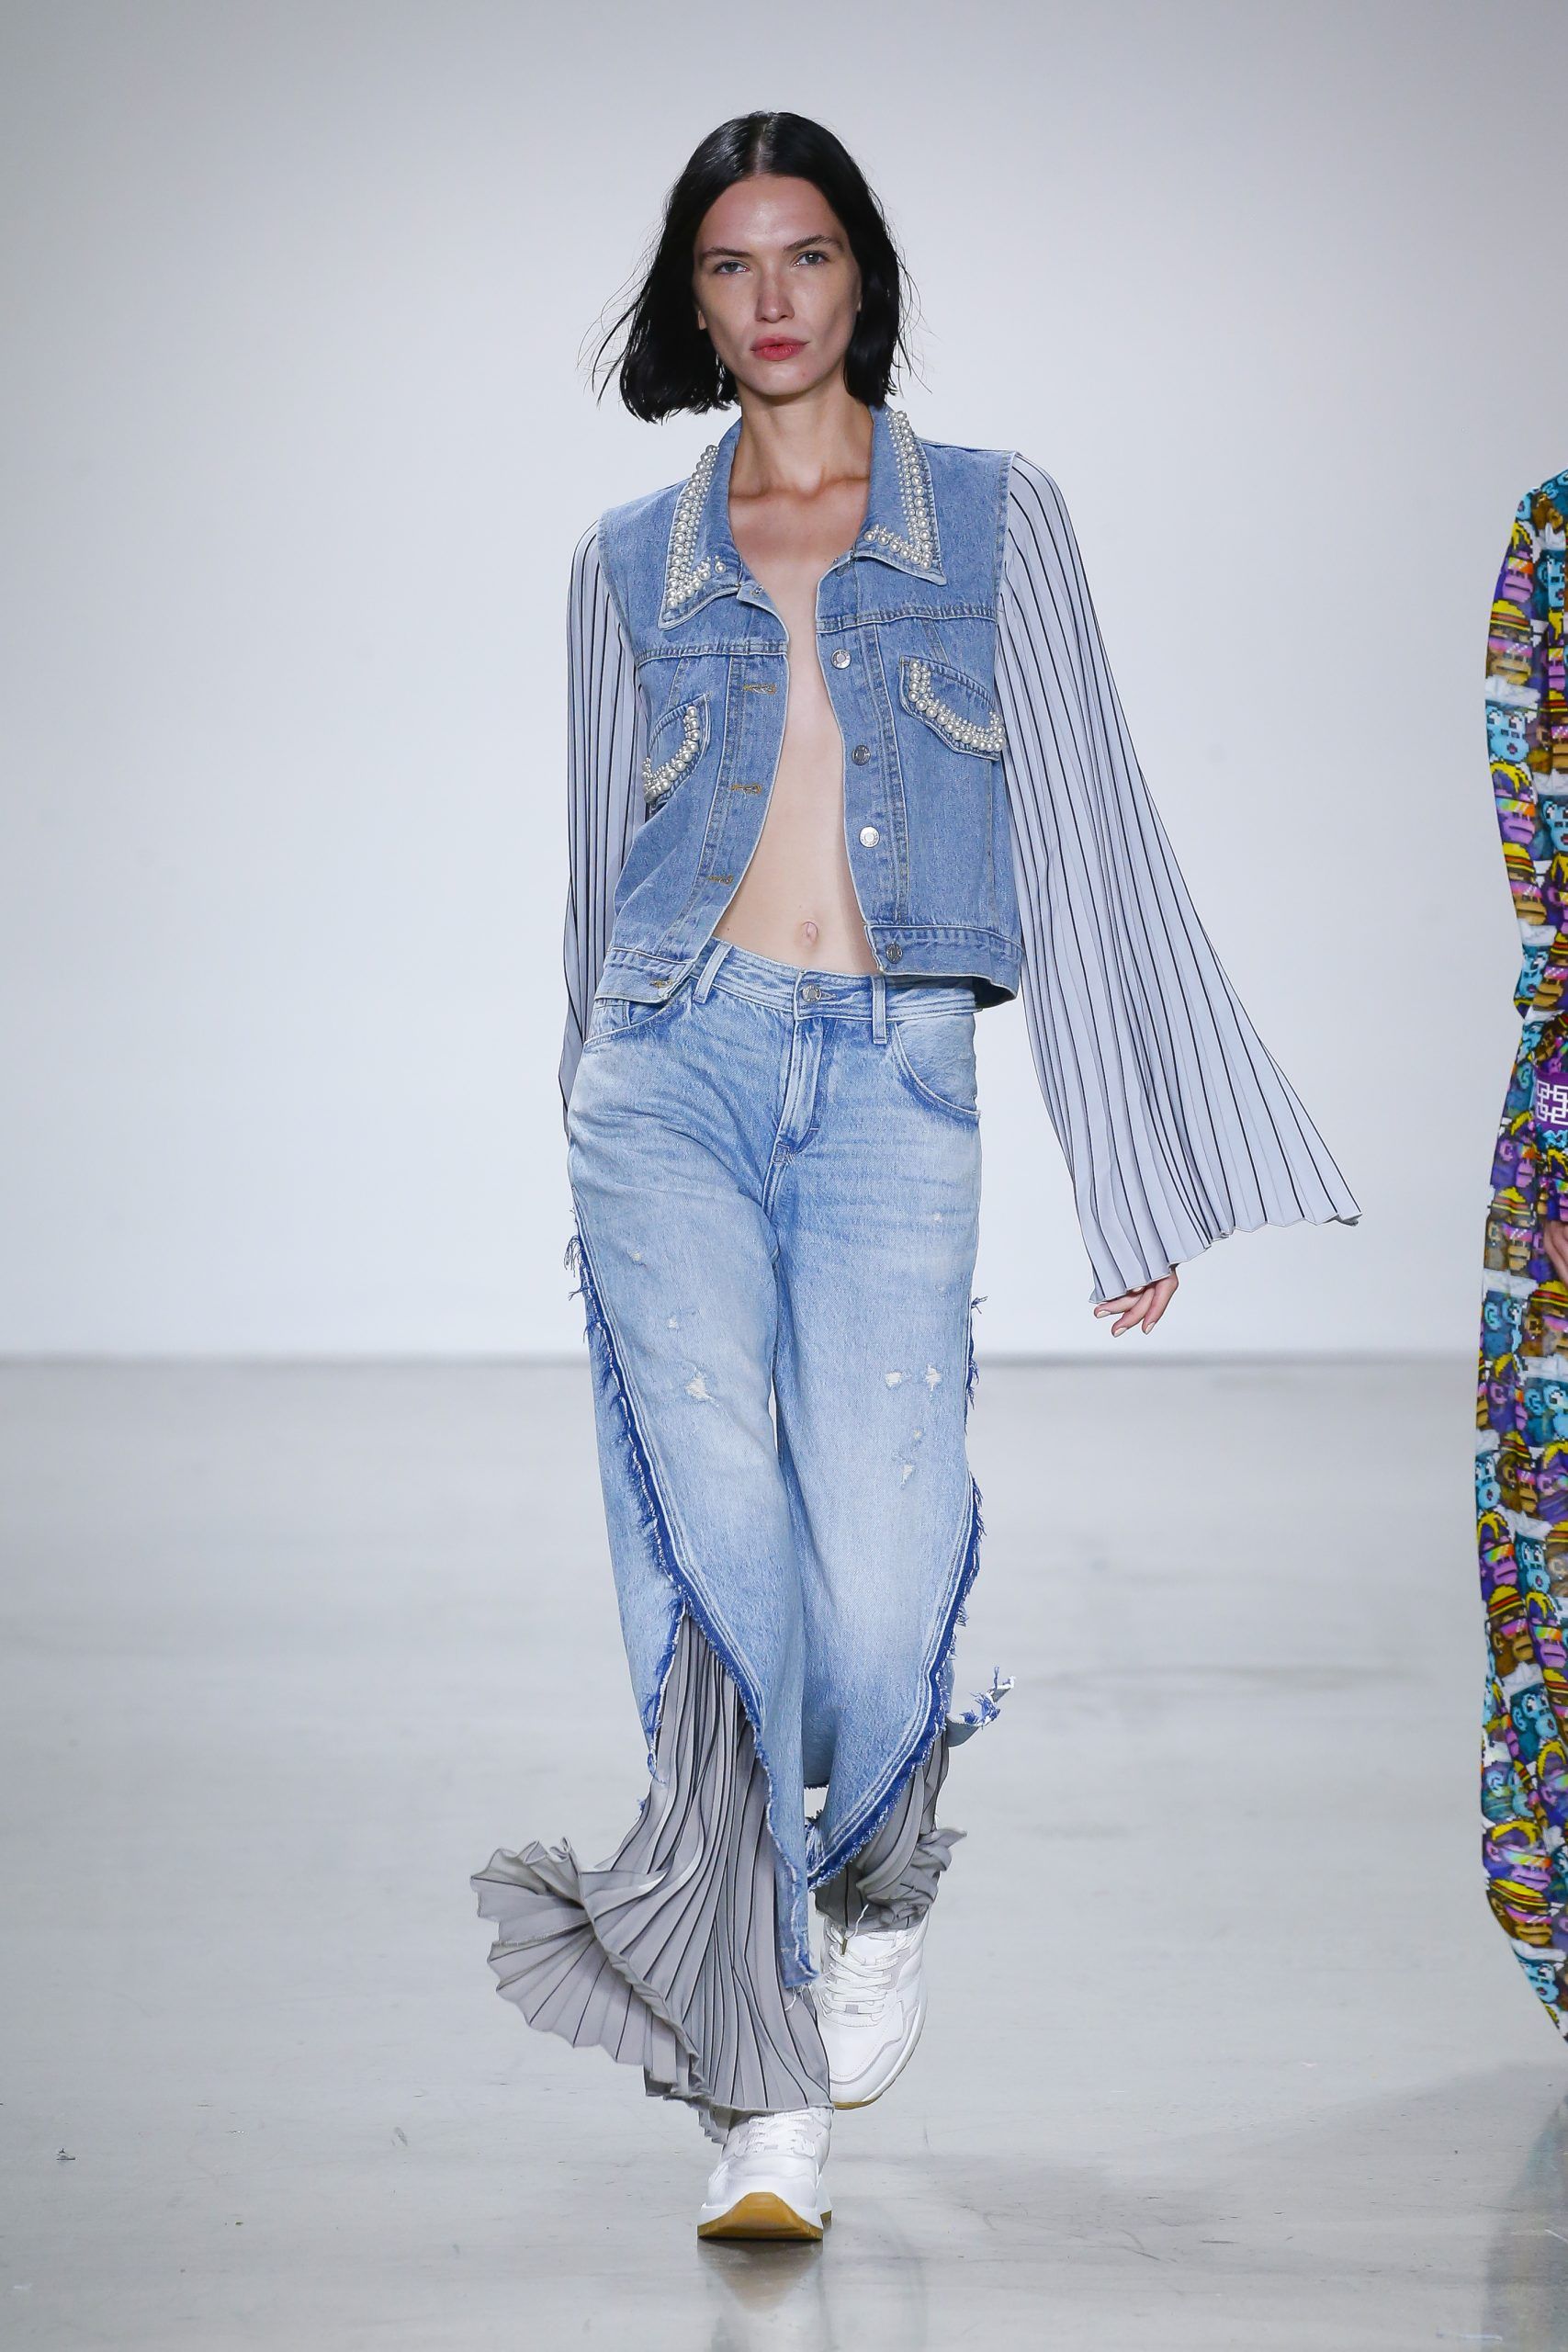 Female model with denim outfit at Metaverse, Past, Present, and Future SS23 show at New York Fashion Week 